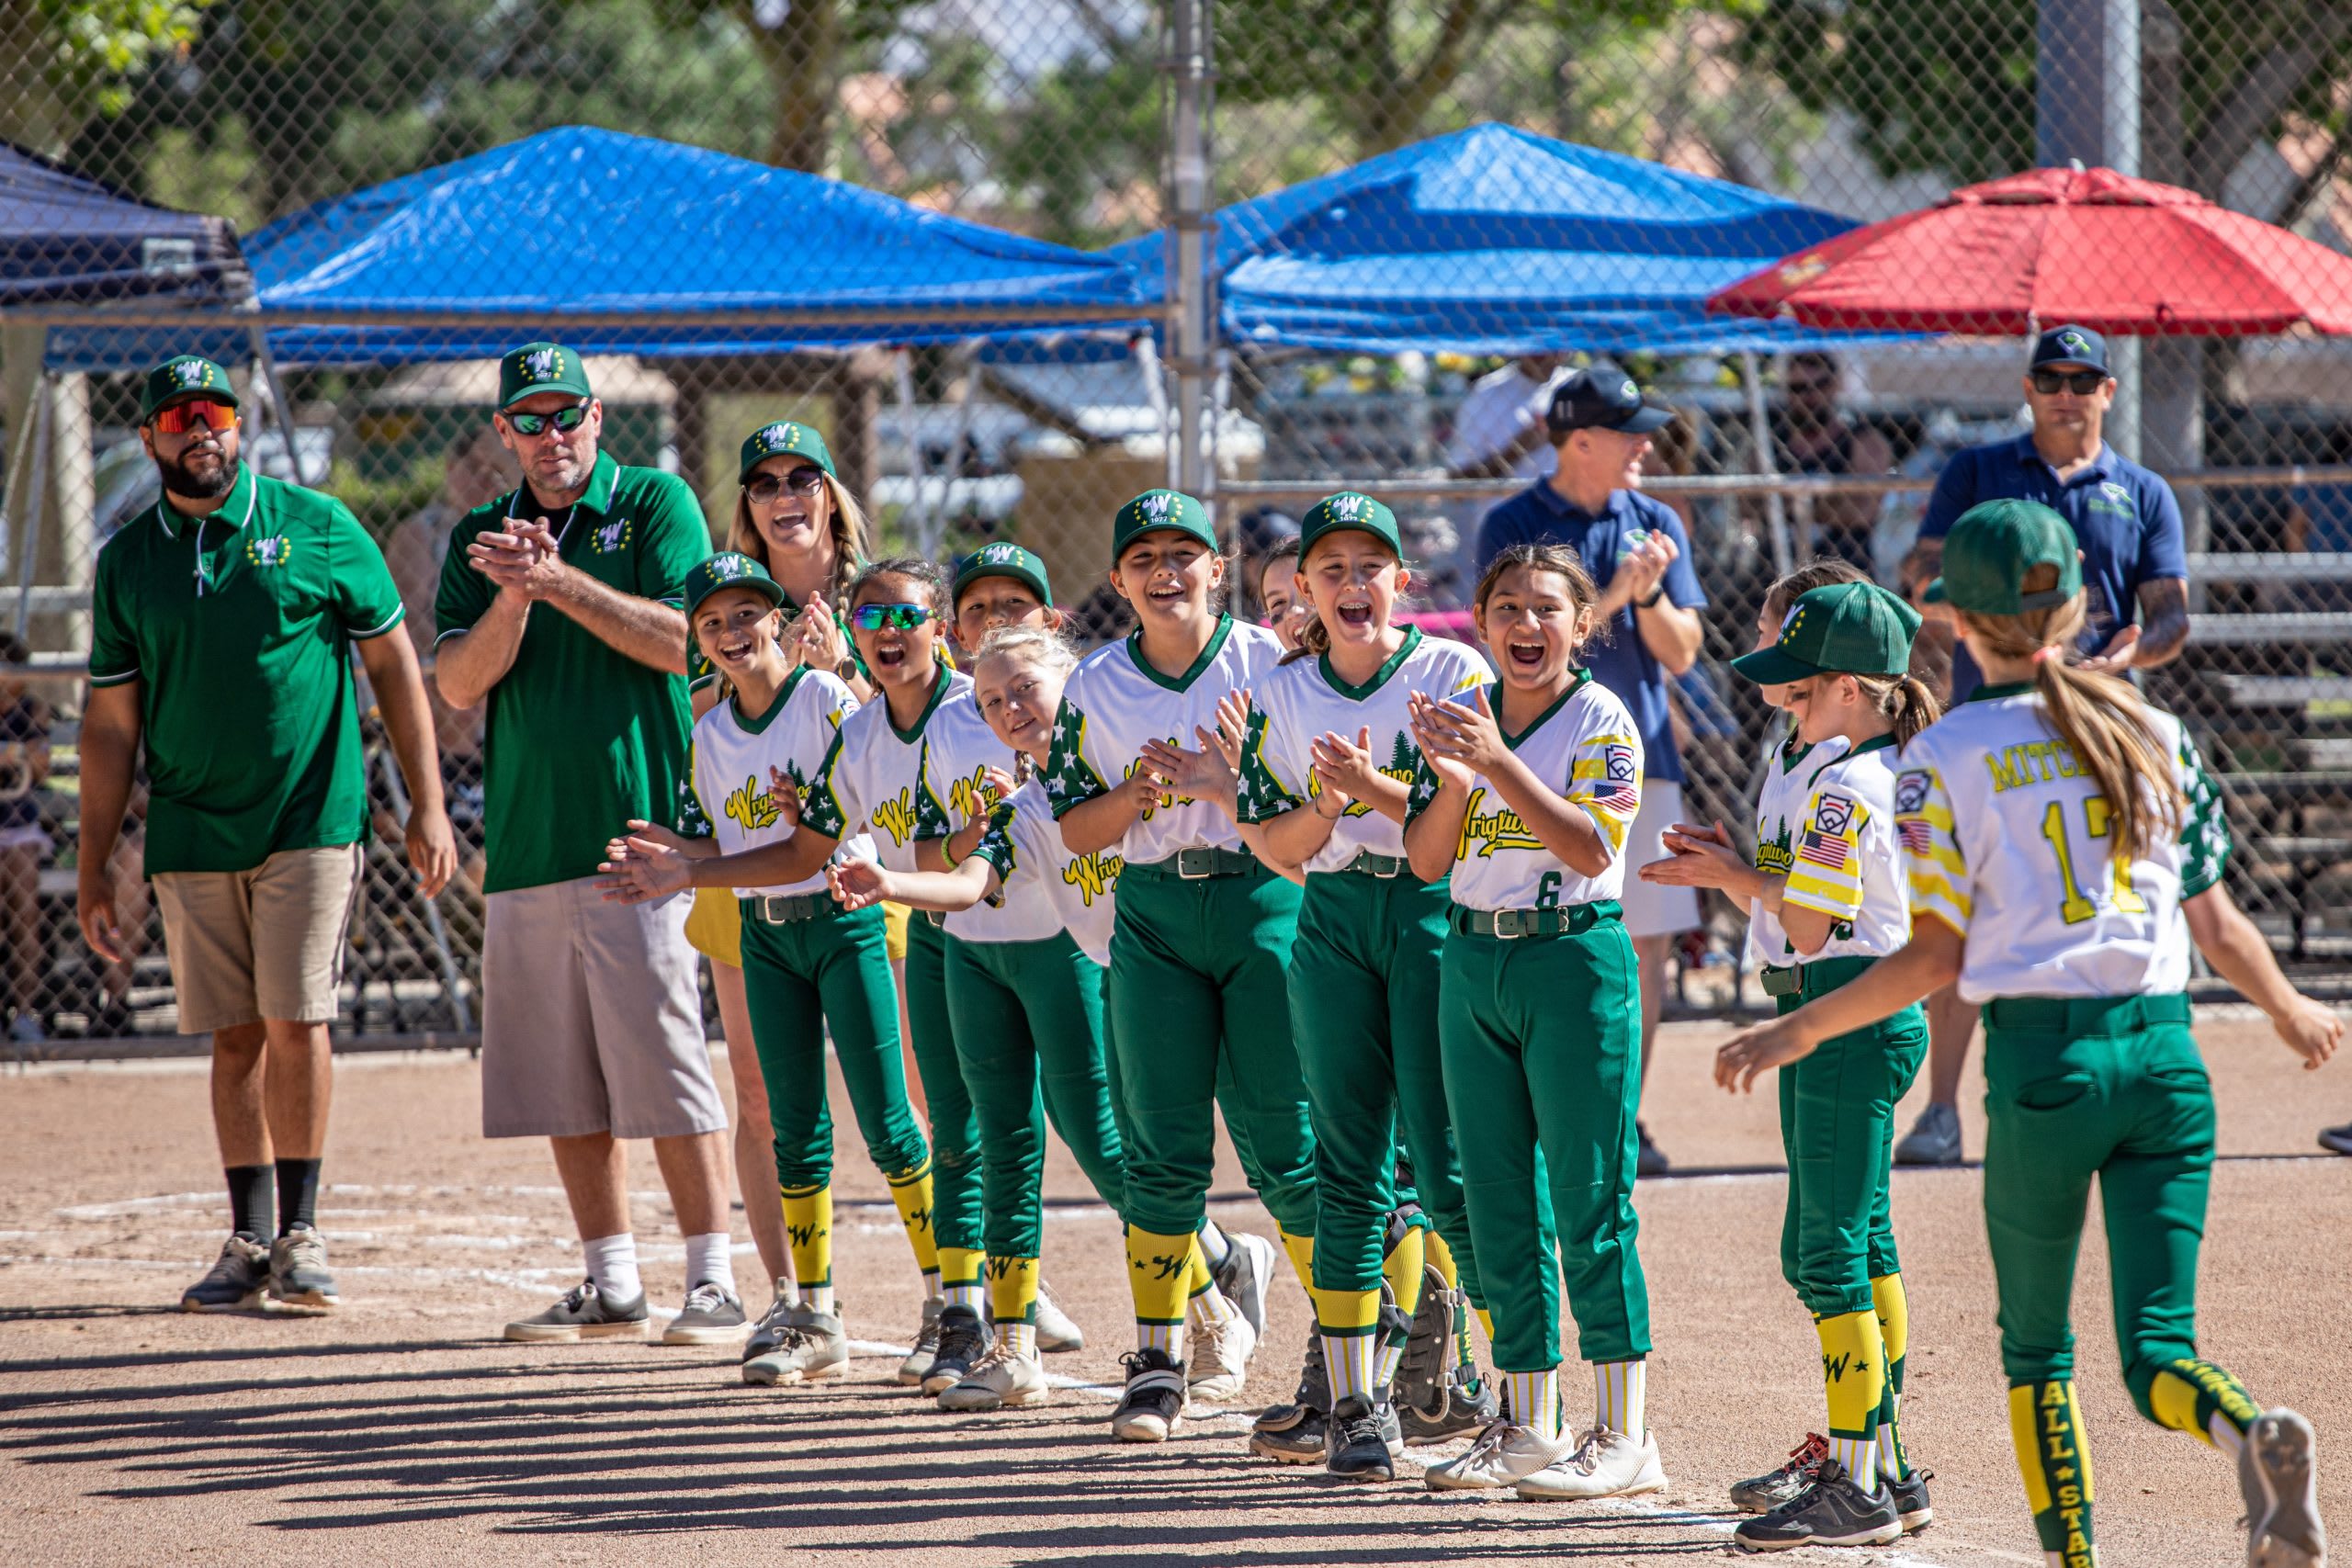 Wrightwood (Calif.) Little League 